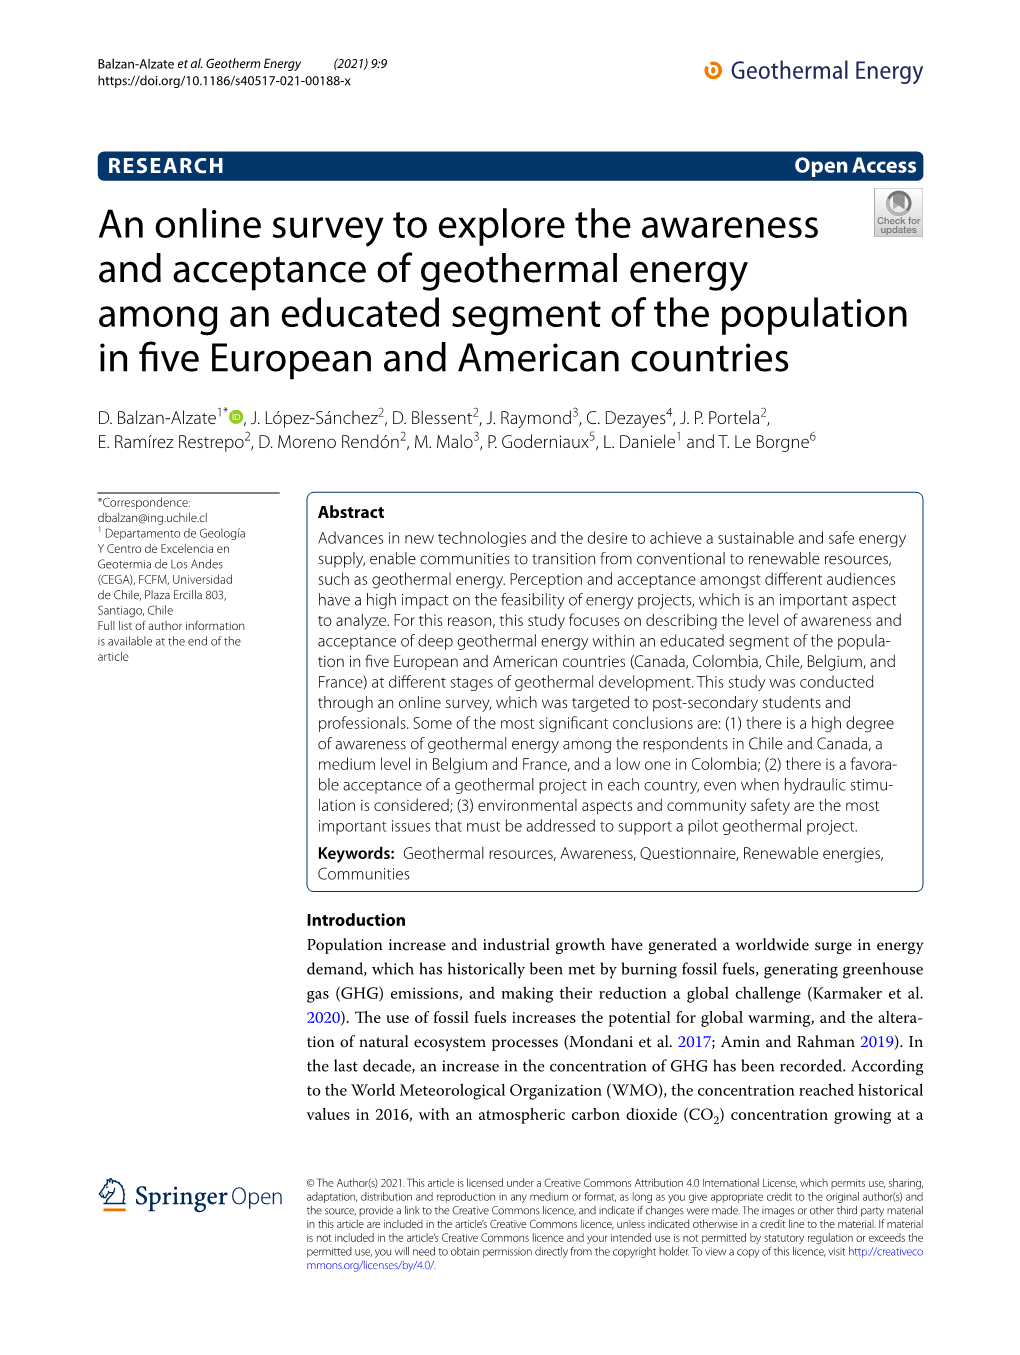 An Online Survey to Explore the Awareness and Acceptance of Geothermal Energy Among an Educated Segment of the Population in Fve European and American Countries